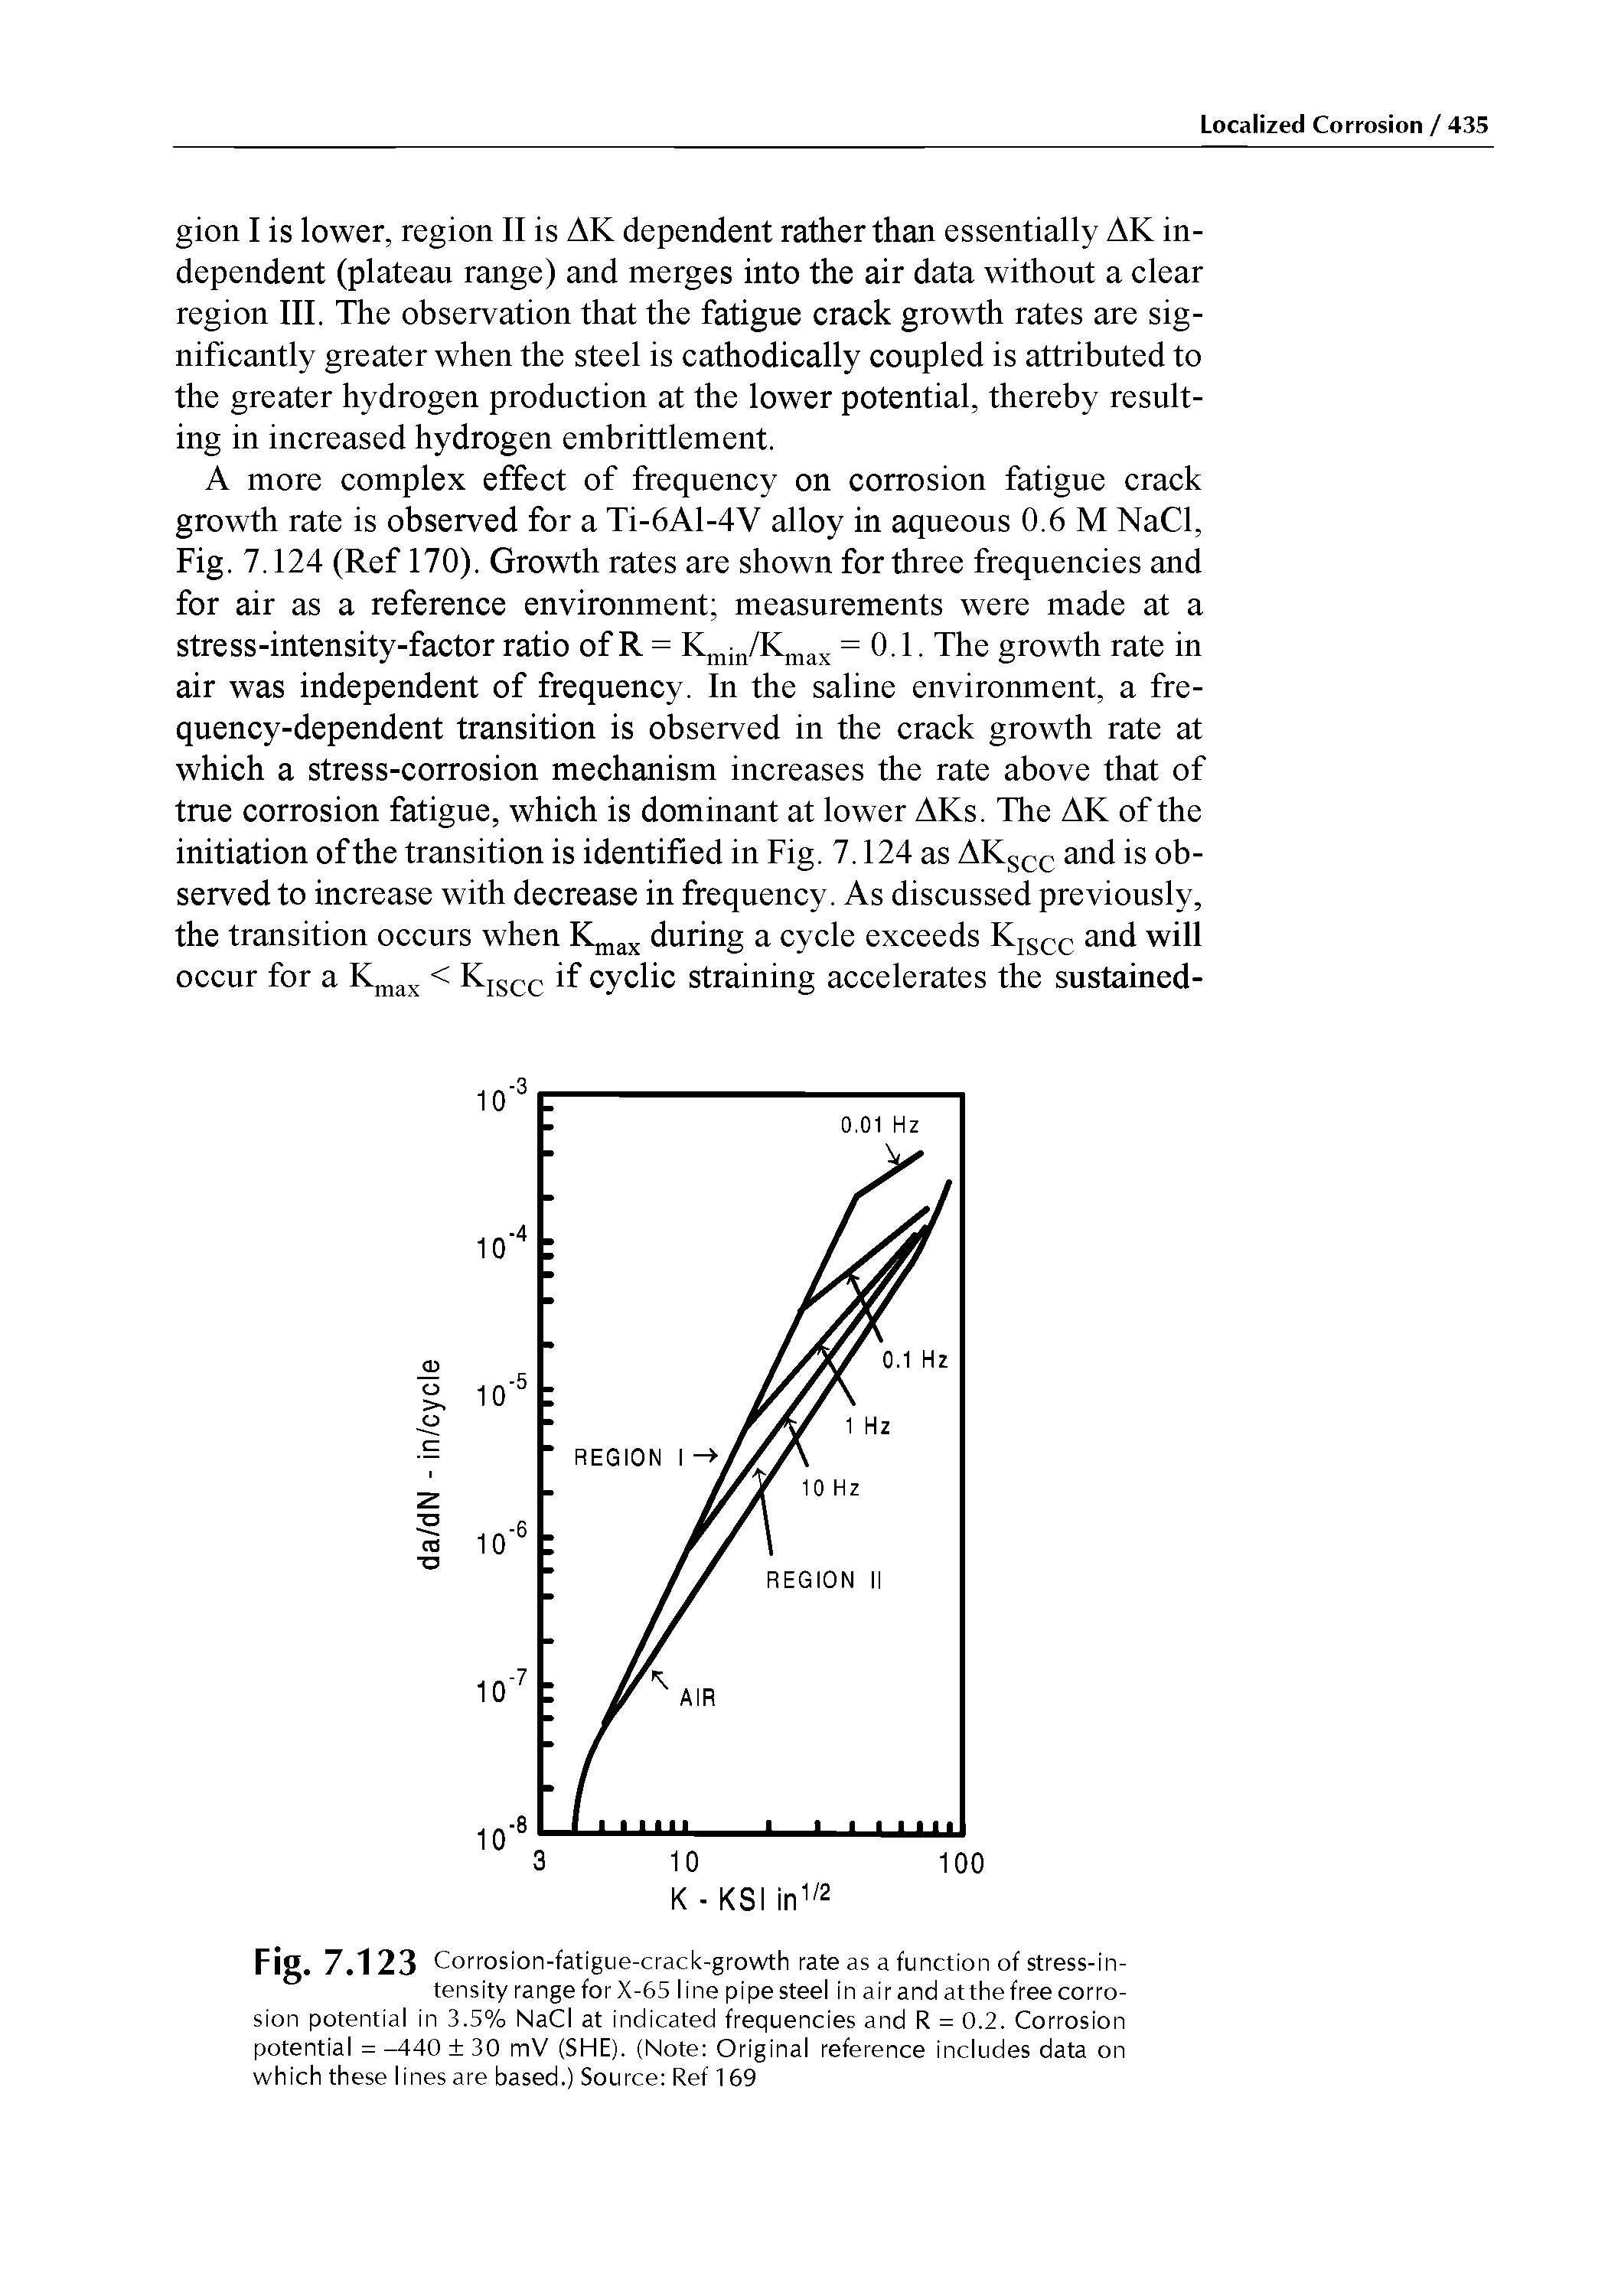 Fig. 7.123 Corrosion-fatigue-crack-growth rate as a function of stress-intensity range for X-65 line pipe steel in air and at the free corrosion potential in 3.5% NaCl at indicated frequencies and R = 0.2. Corrosion potential = -440 30 mV (SHE). (Note Original reference includes data on which these lines are based.) Source Ref 1 69...